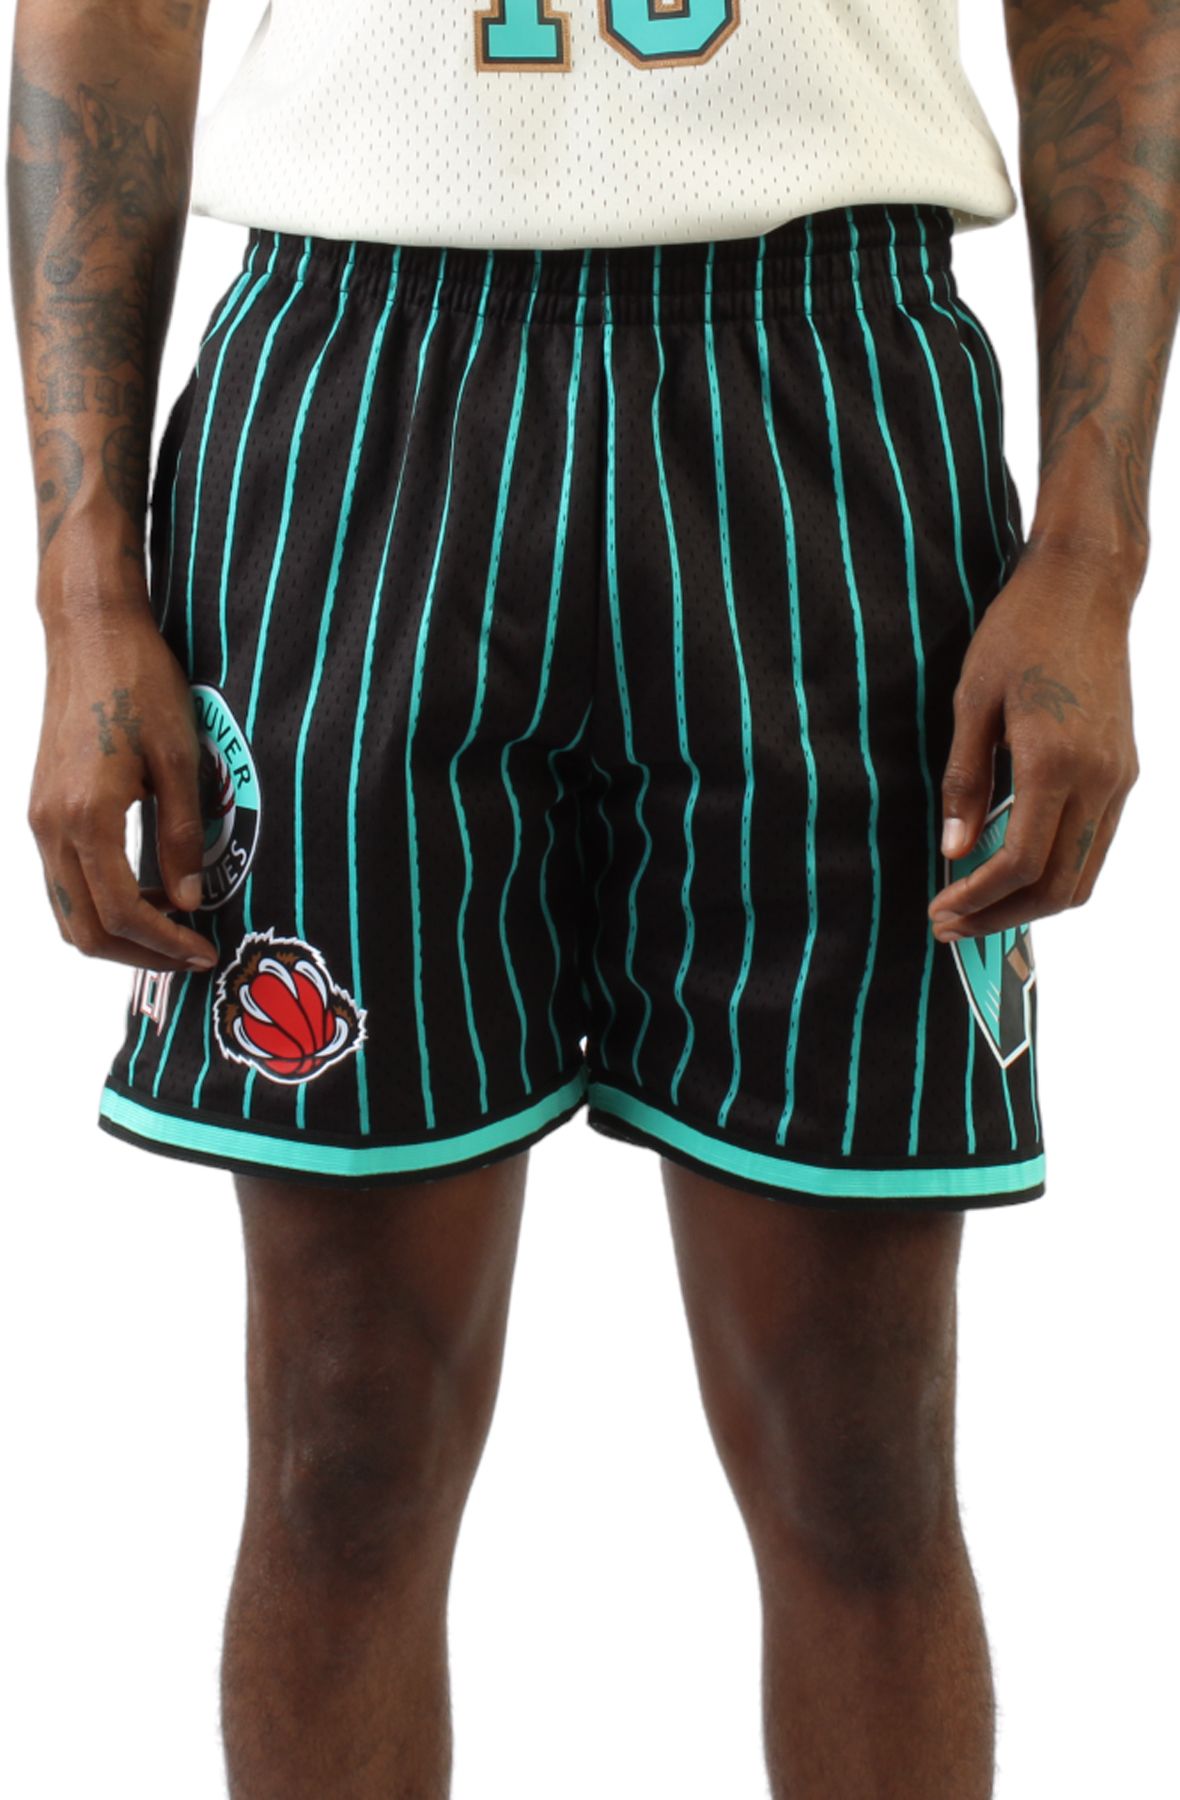 mitchell and ness memphis grizzlies shorts